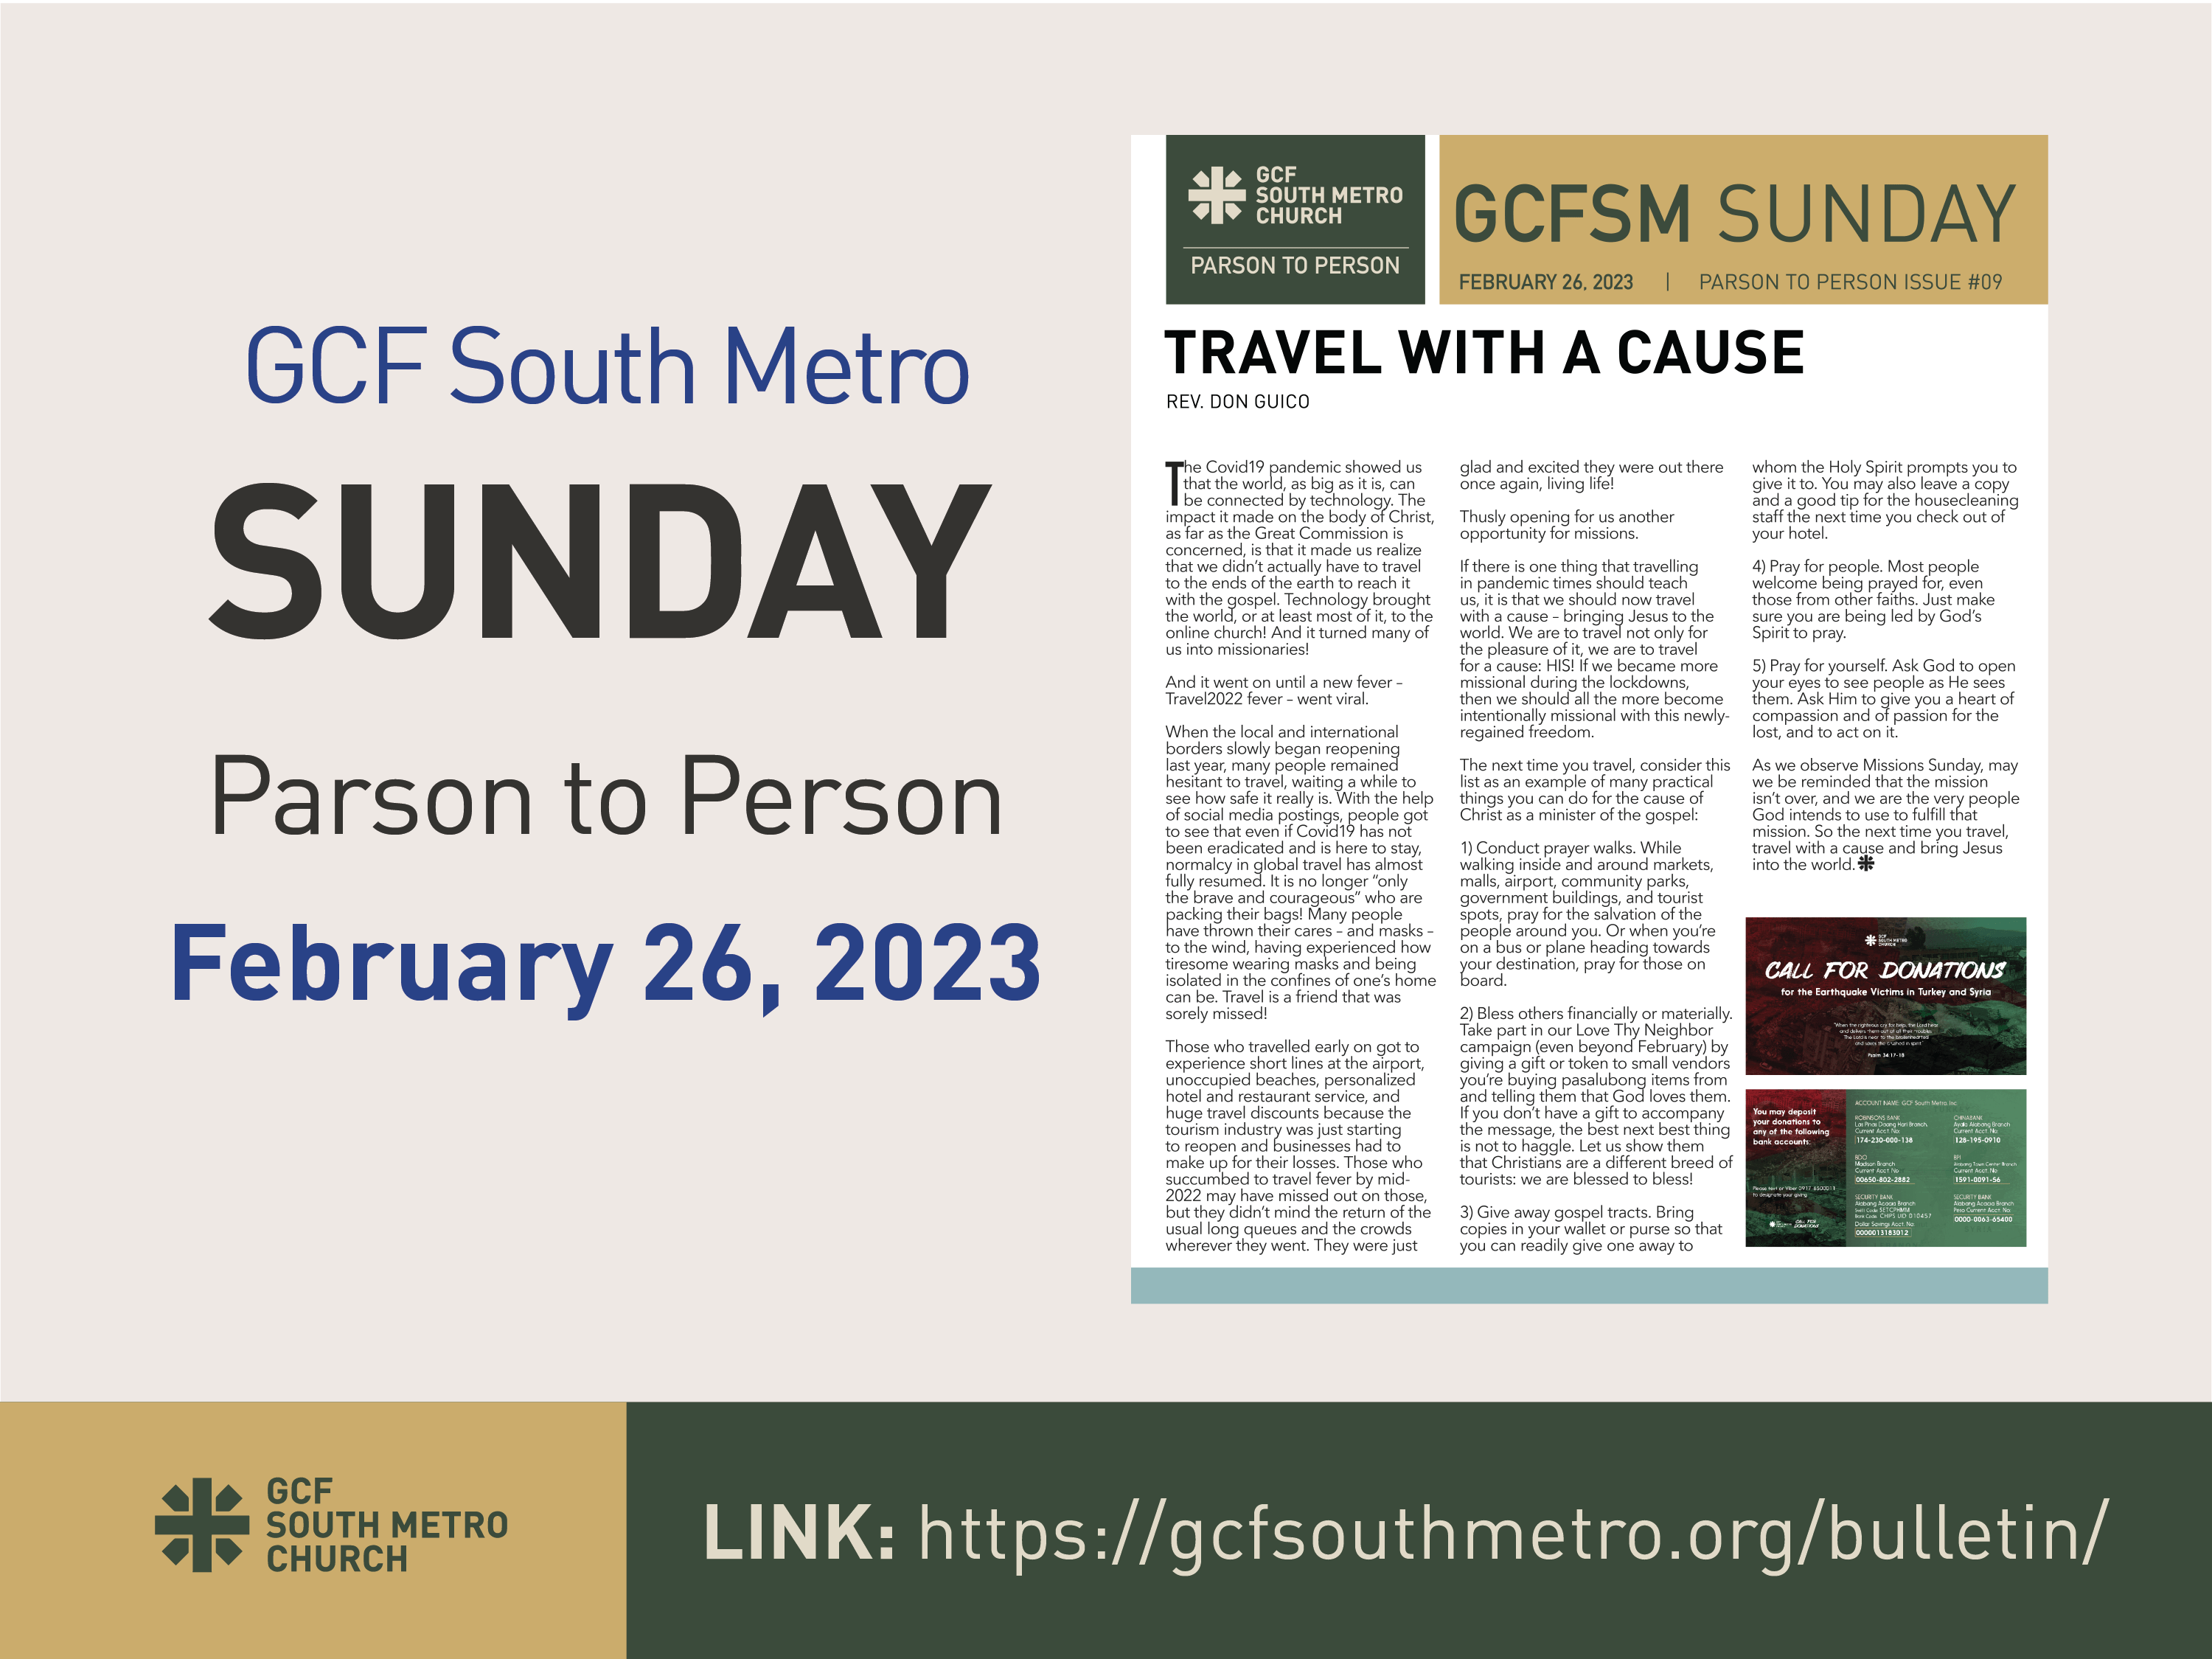 Sunday Bulletin – Parson to Person, February 26, 2023